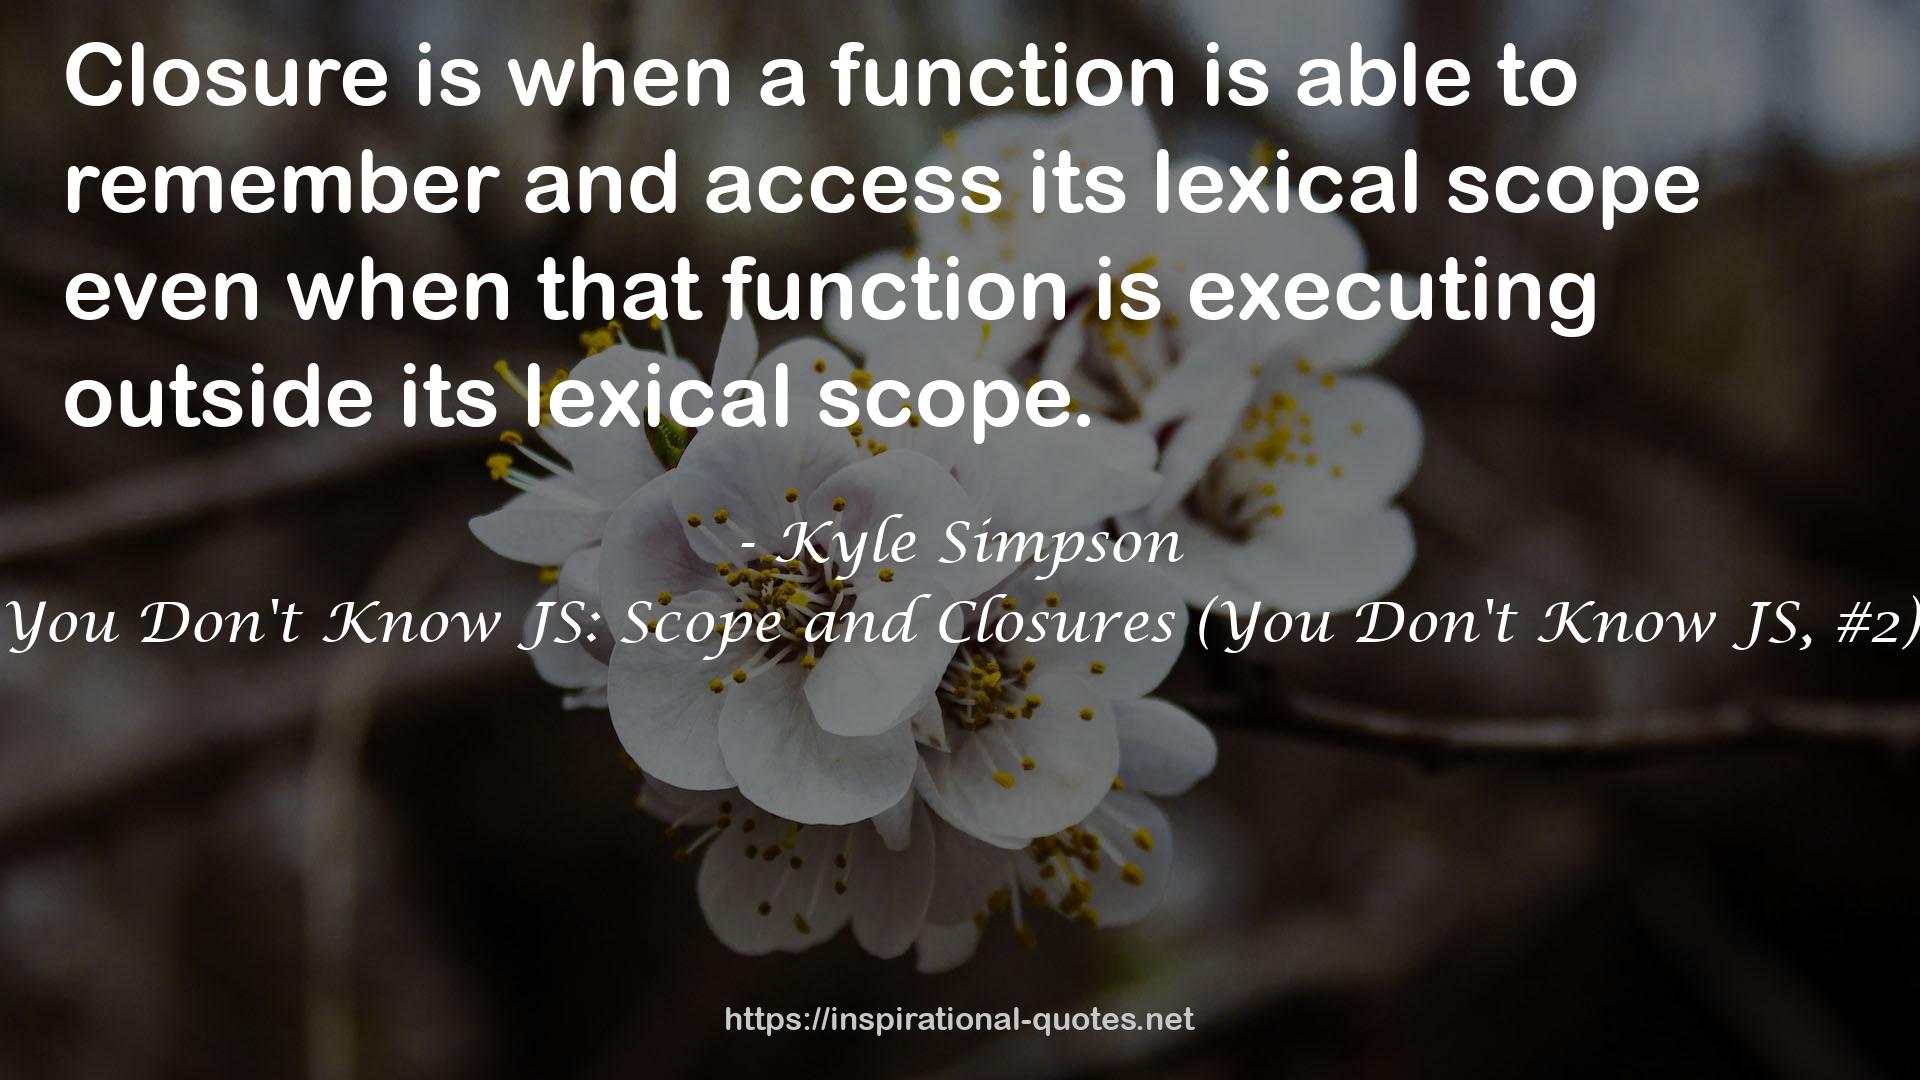 You Don't Know JS: Scope and Closures (You Don't Know JS, #2) QUOTES